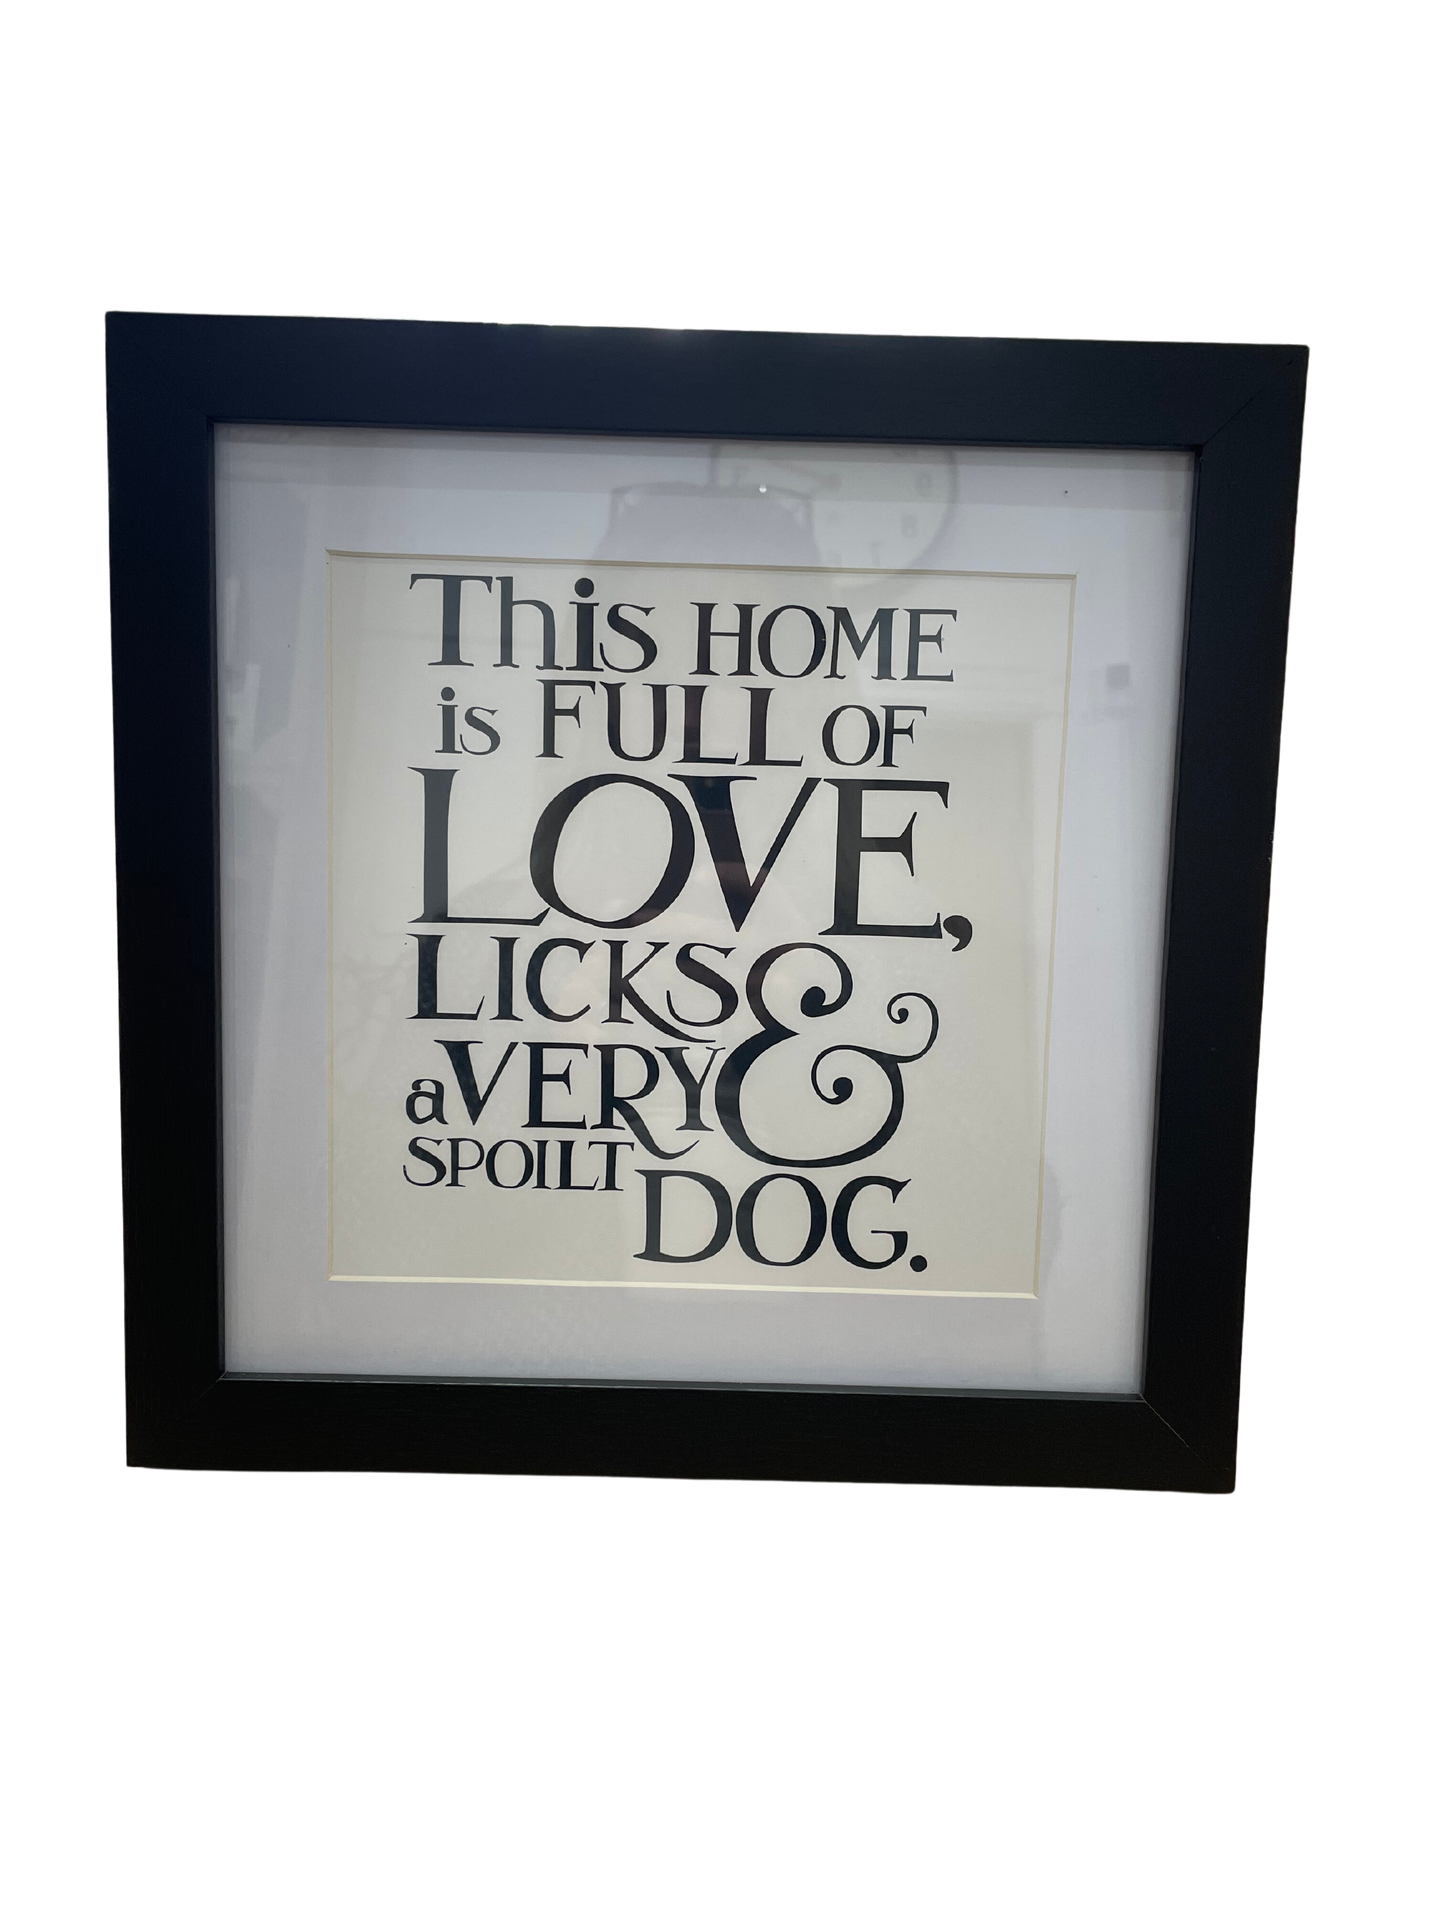 Framed Phrase Prints - Black Toast - This home is full of Love, Licks & a very spoilt Dog.